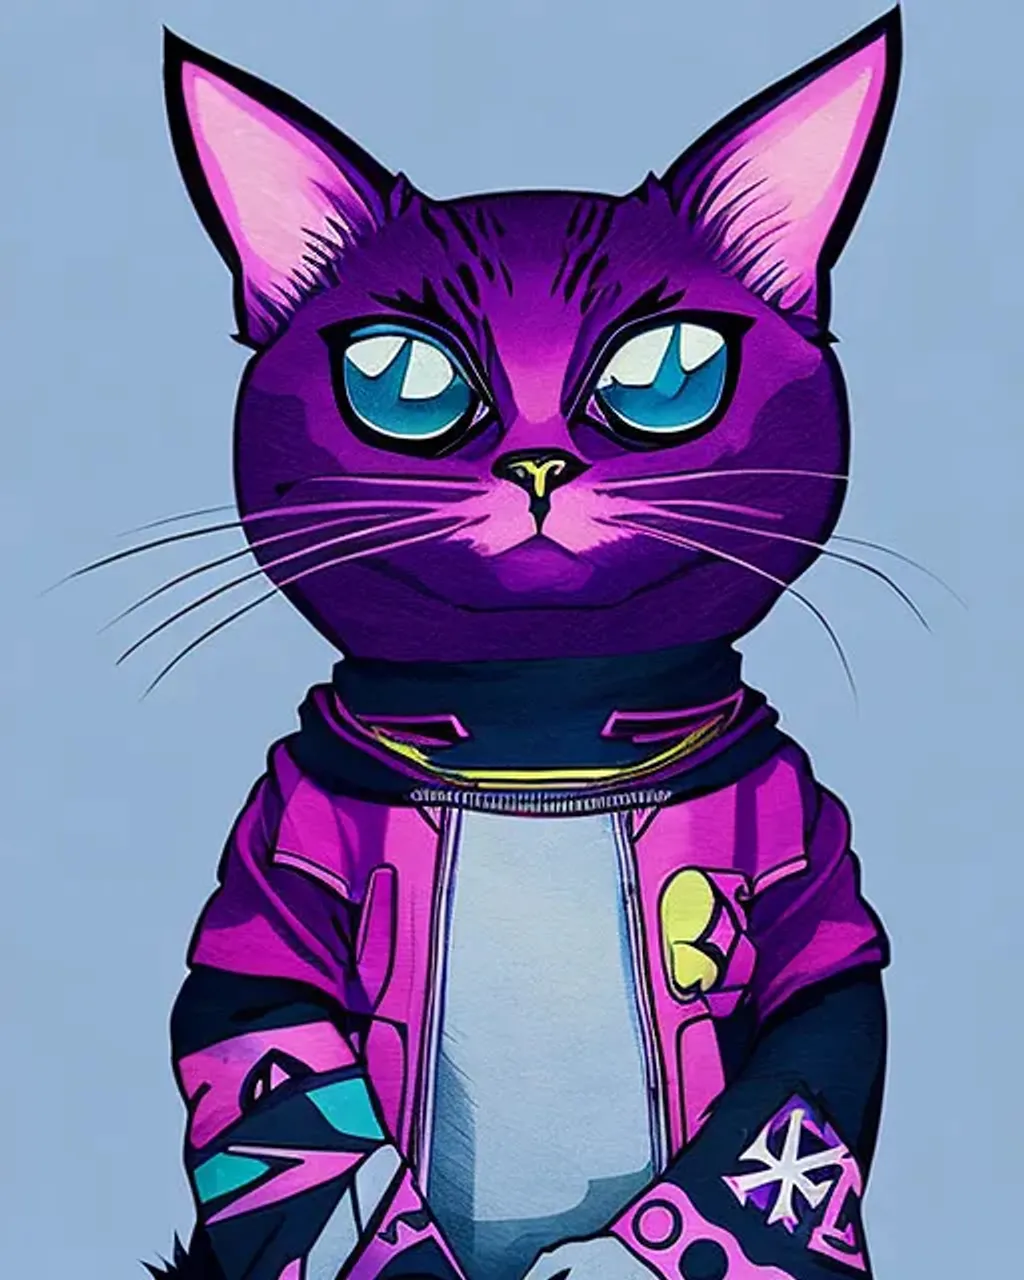 Prompt: a drawing of a cat wearing a hoodie, by Petros Afshar, pixiv, akira from chinese mythology, the mekanik doll, cory behance hd, amethyst, sfw, bunnypunk, atom, hey, open, ruan ji, morgana, glitchpunk, at behance